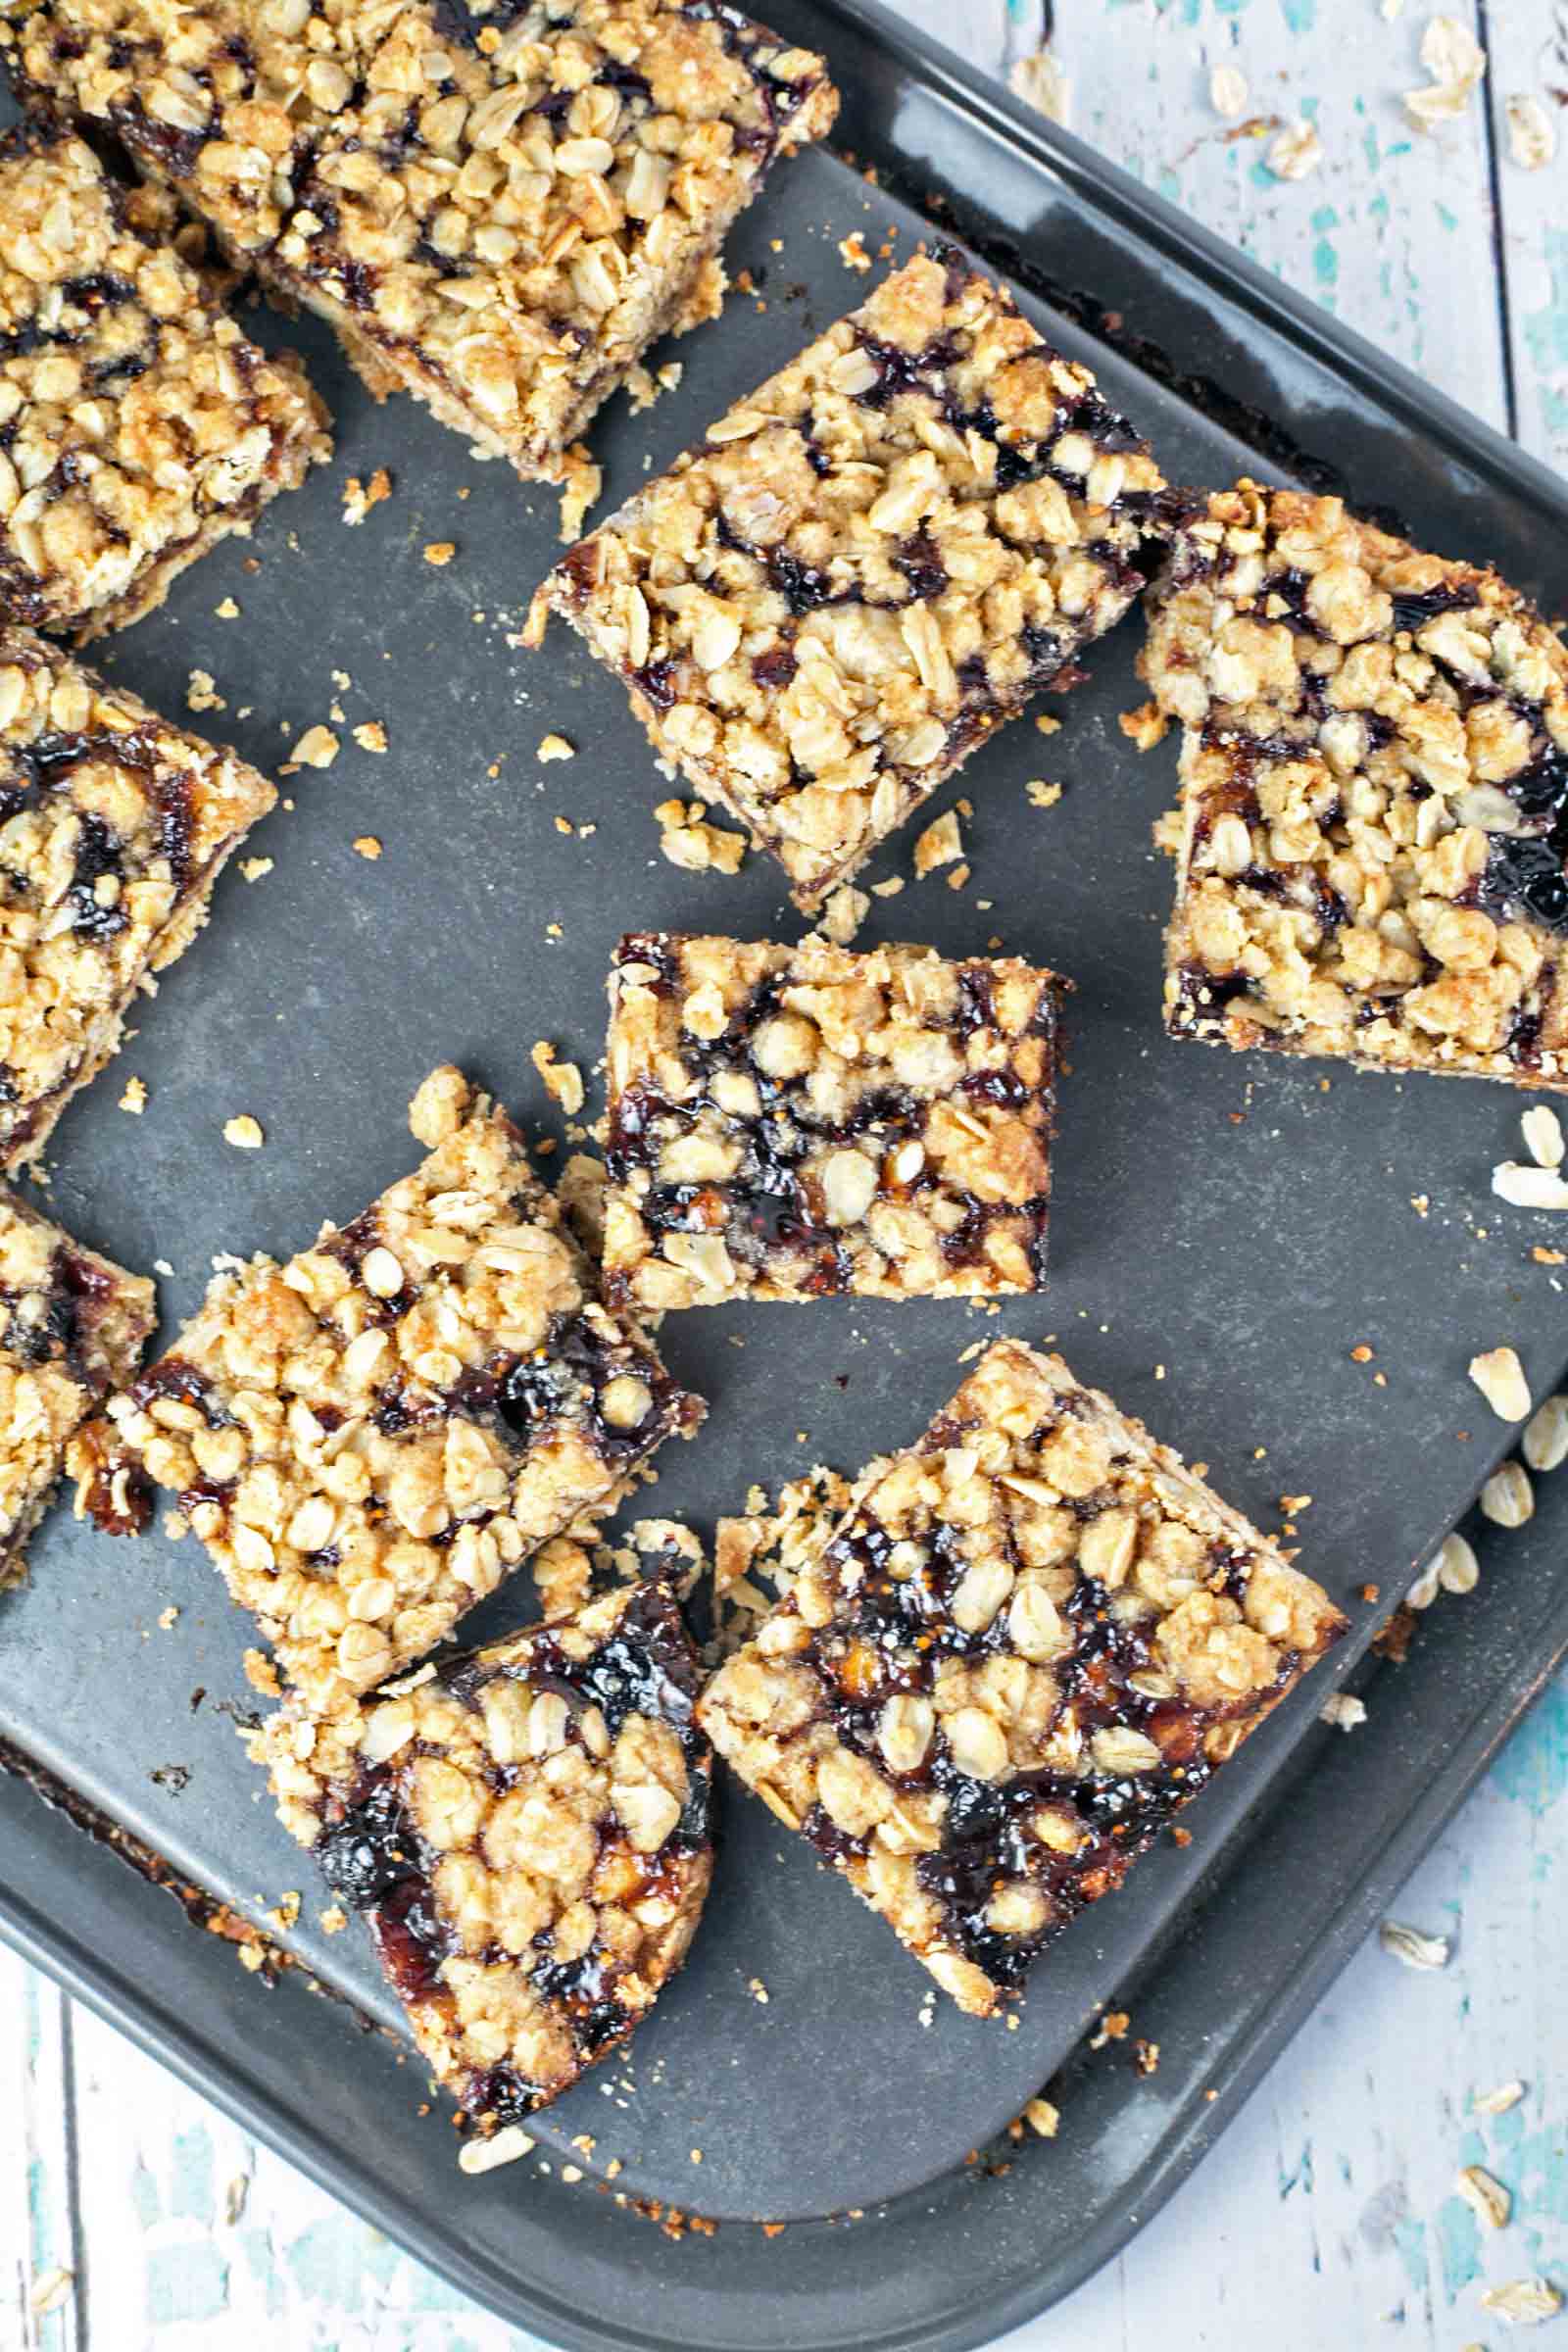 Oatmeal Jam Bars: one bowl, one spoon, mix by hand fruit bars. Oatmeal shortbread crust, a layer of jam, and an oatmeal crumble topping. Make ahead - freezer friendly! {Bunsen Burner Bakery}